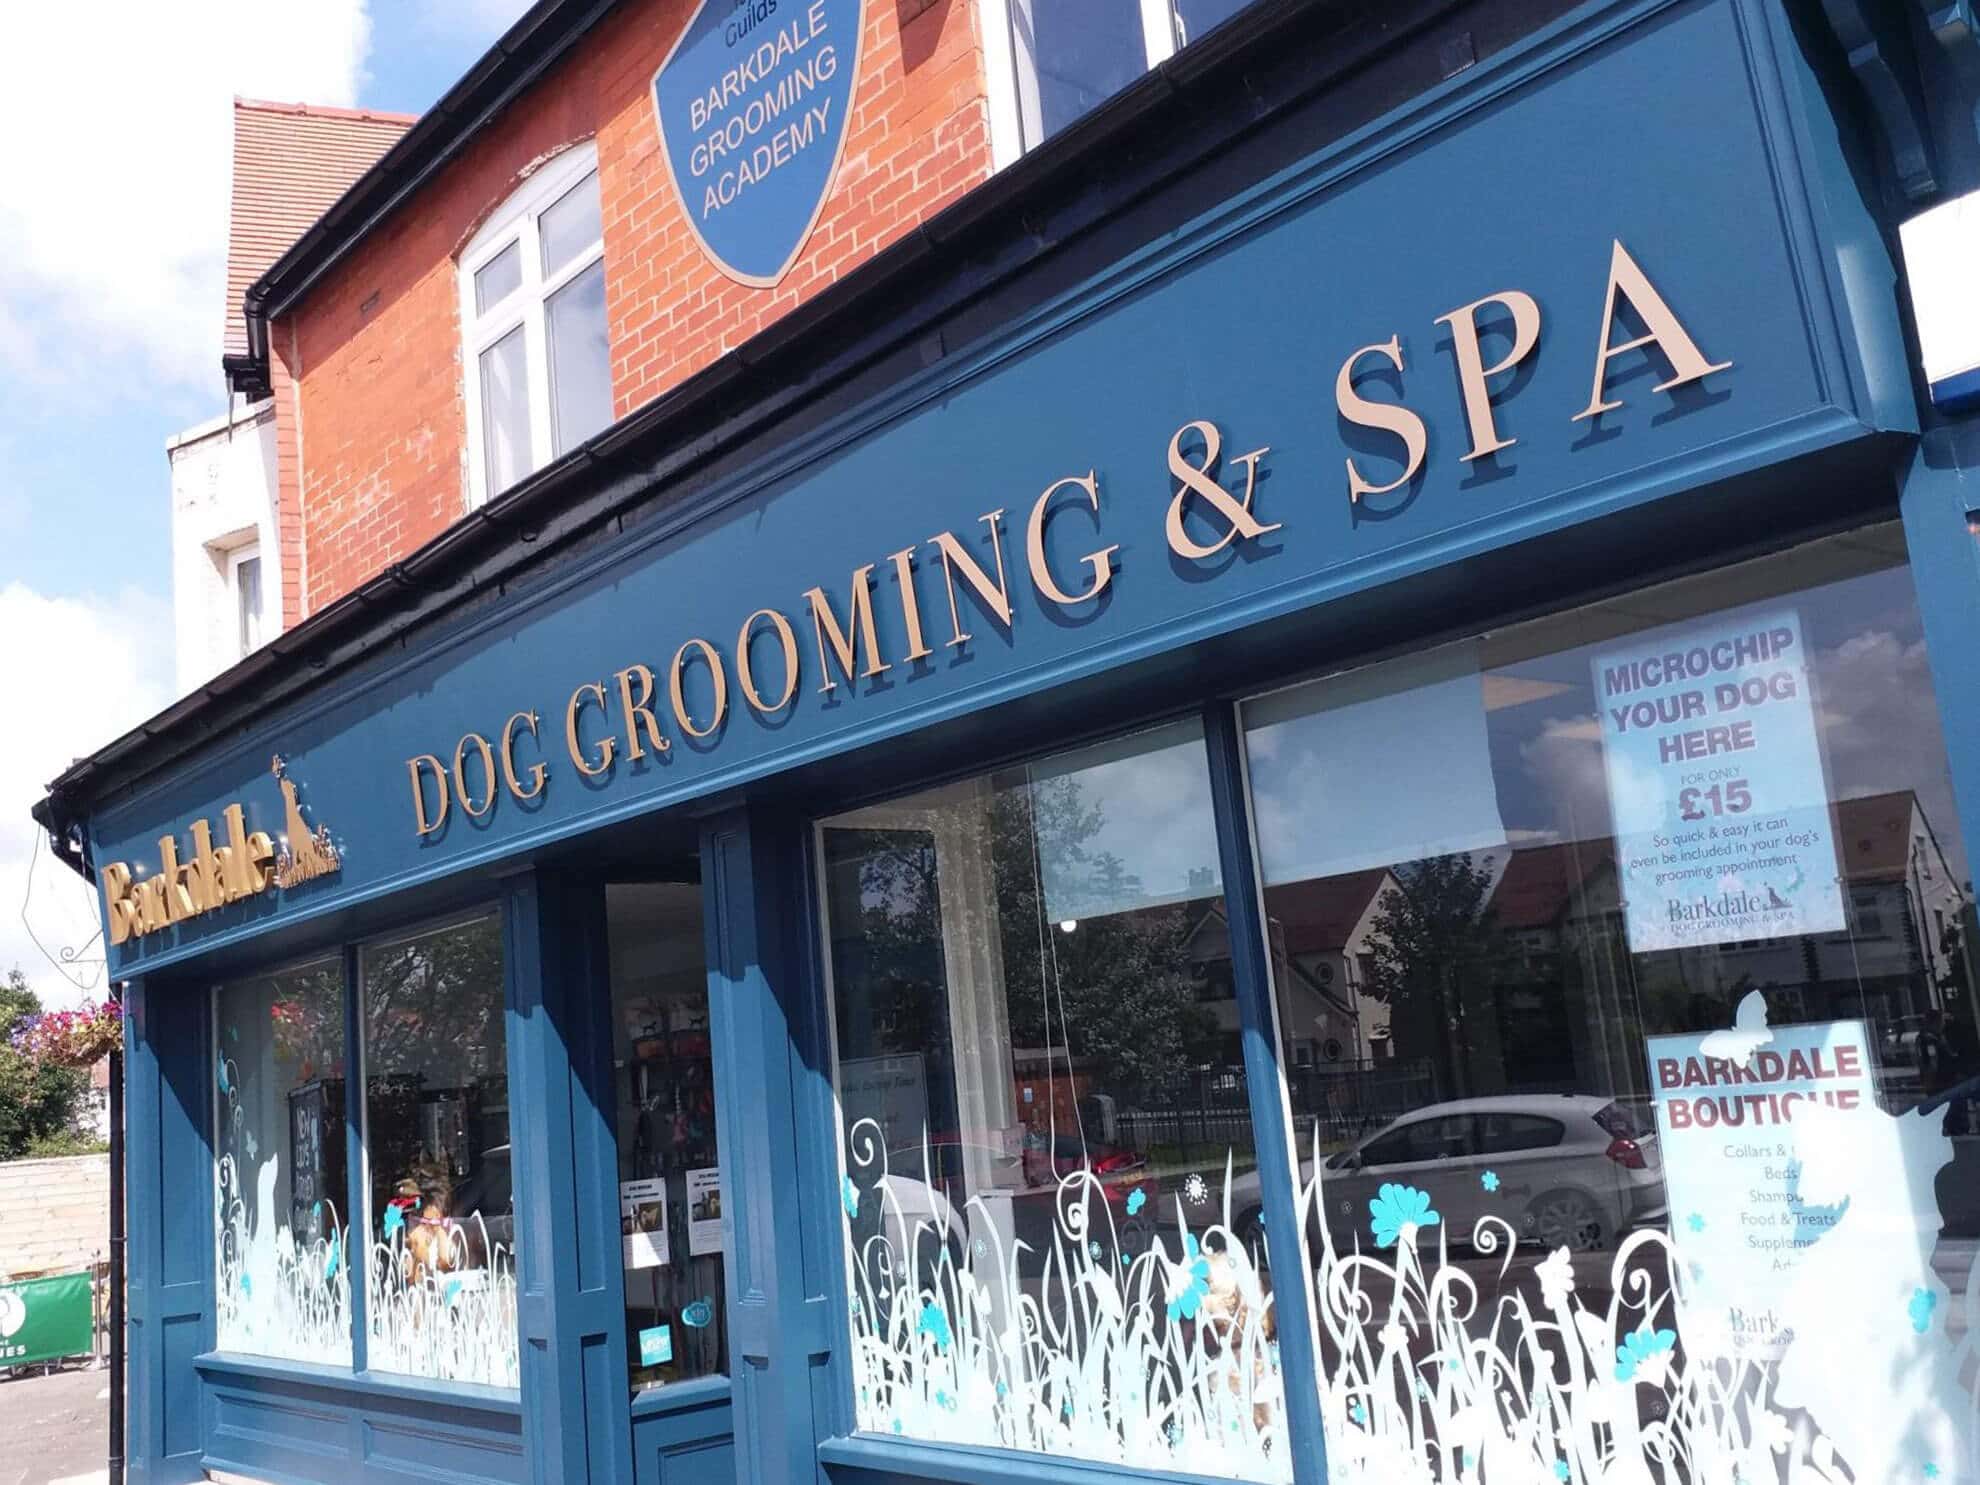 Barkdale dog grooming & spa sign - Illuminated stand off letters